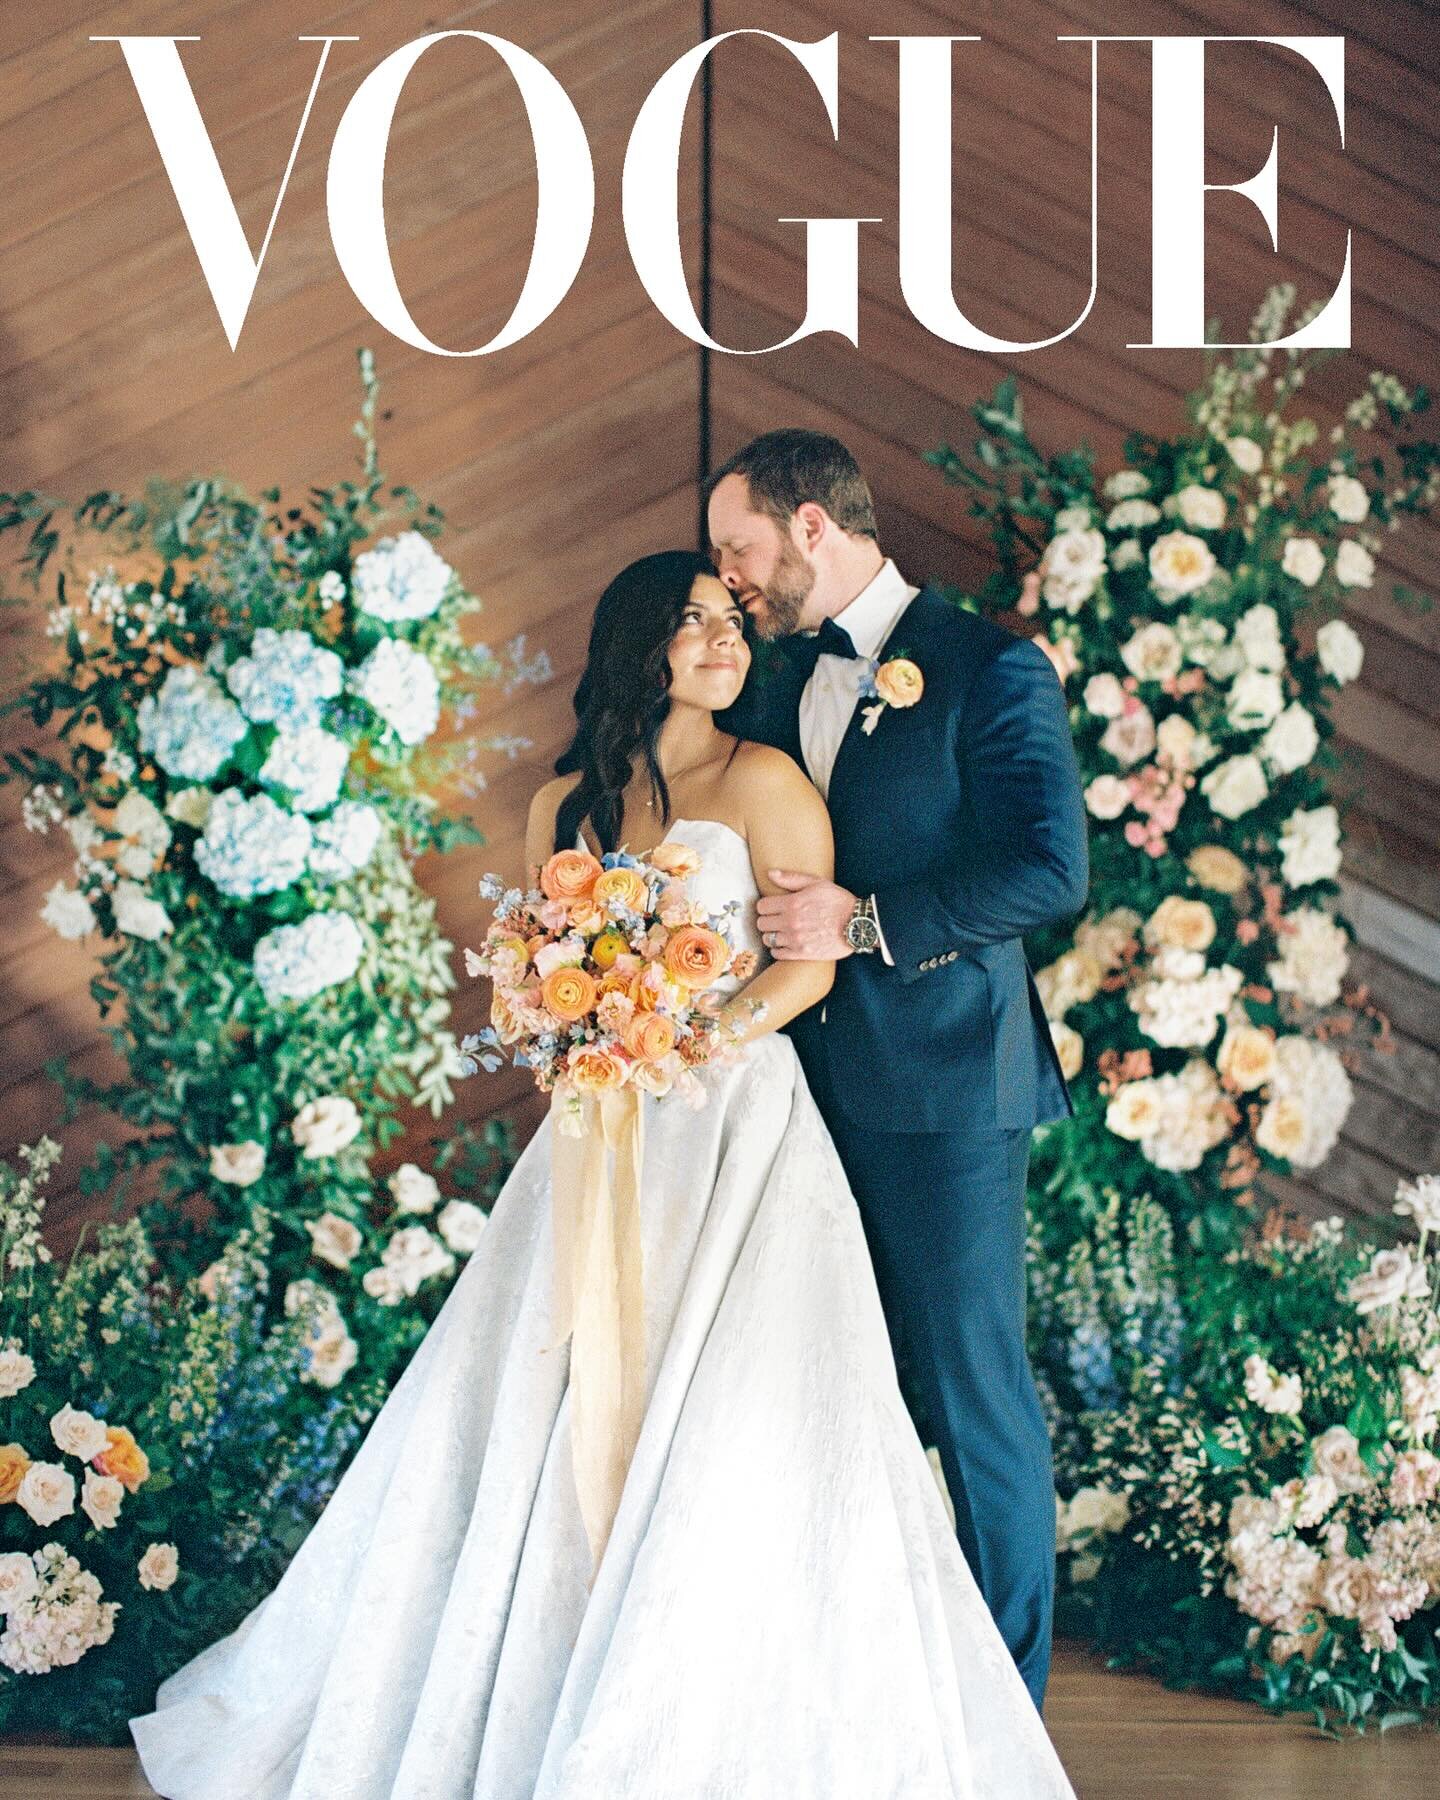 This is a dream come true! 🤍
We are thrilled to be featured in the April issue of @britishvogue This is a significant milestone for us, and we are immensely grateful for our amazing team who made it possible.
We appreciate this opportunity and exten